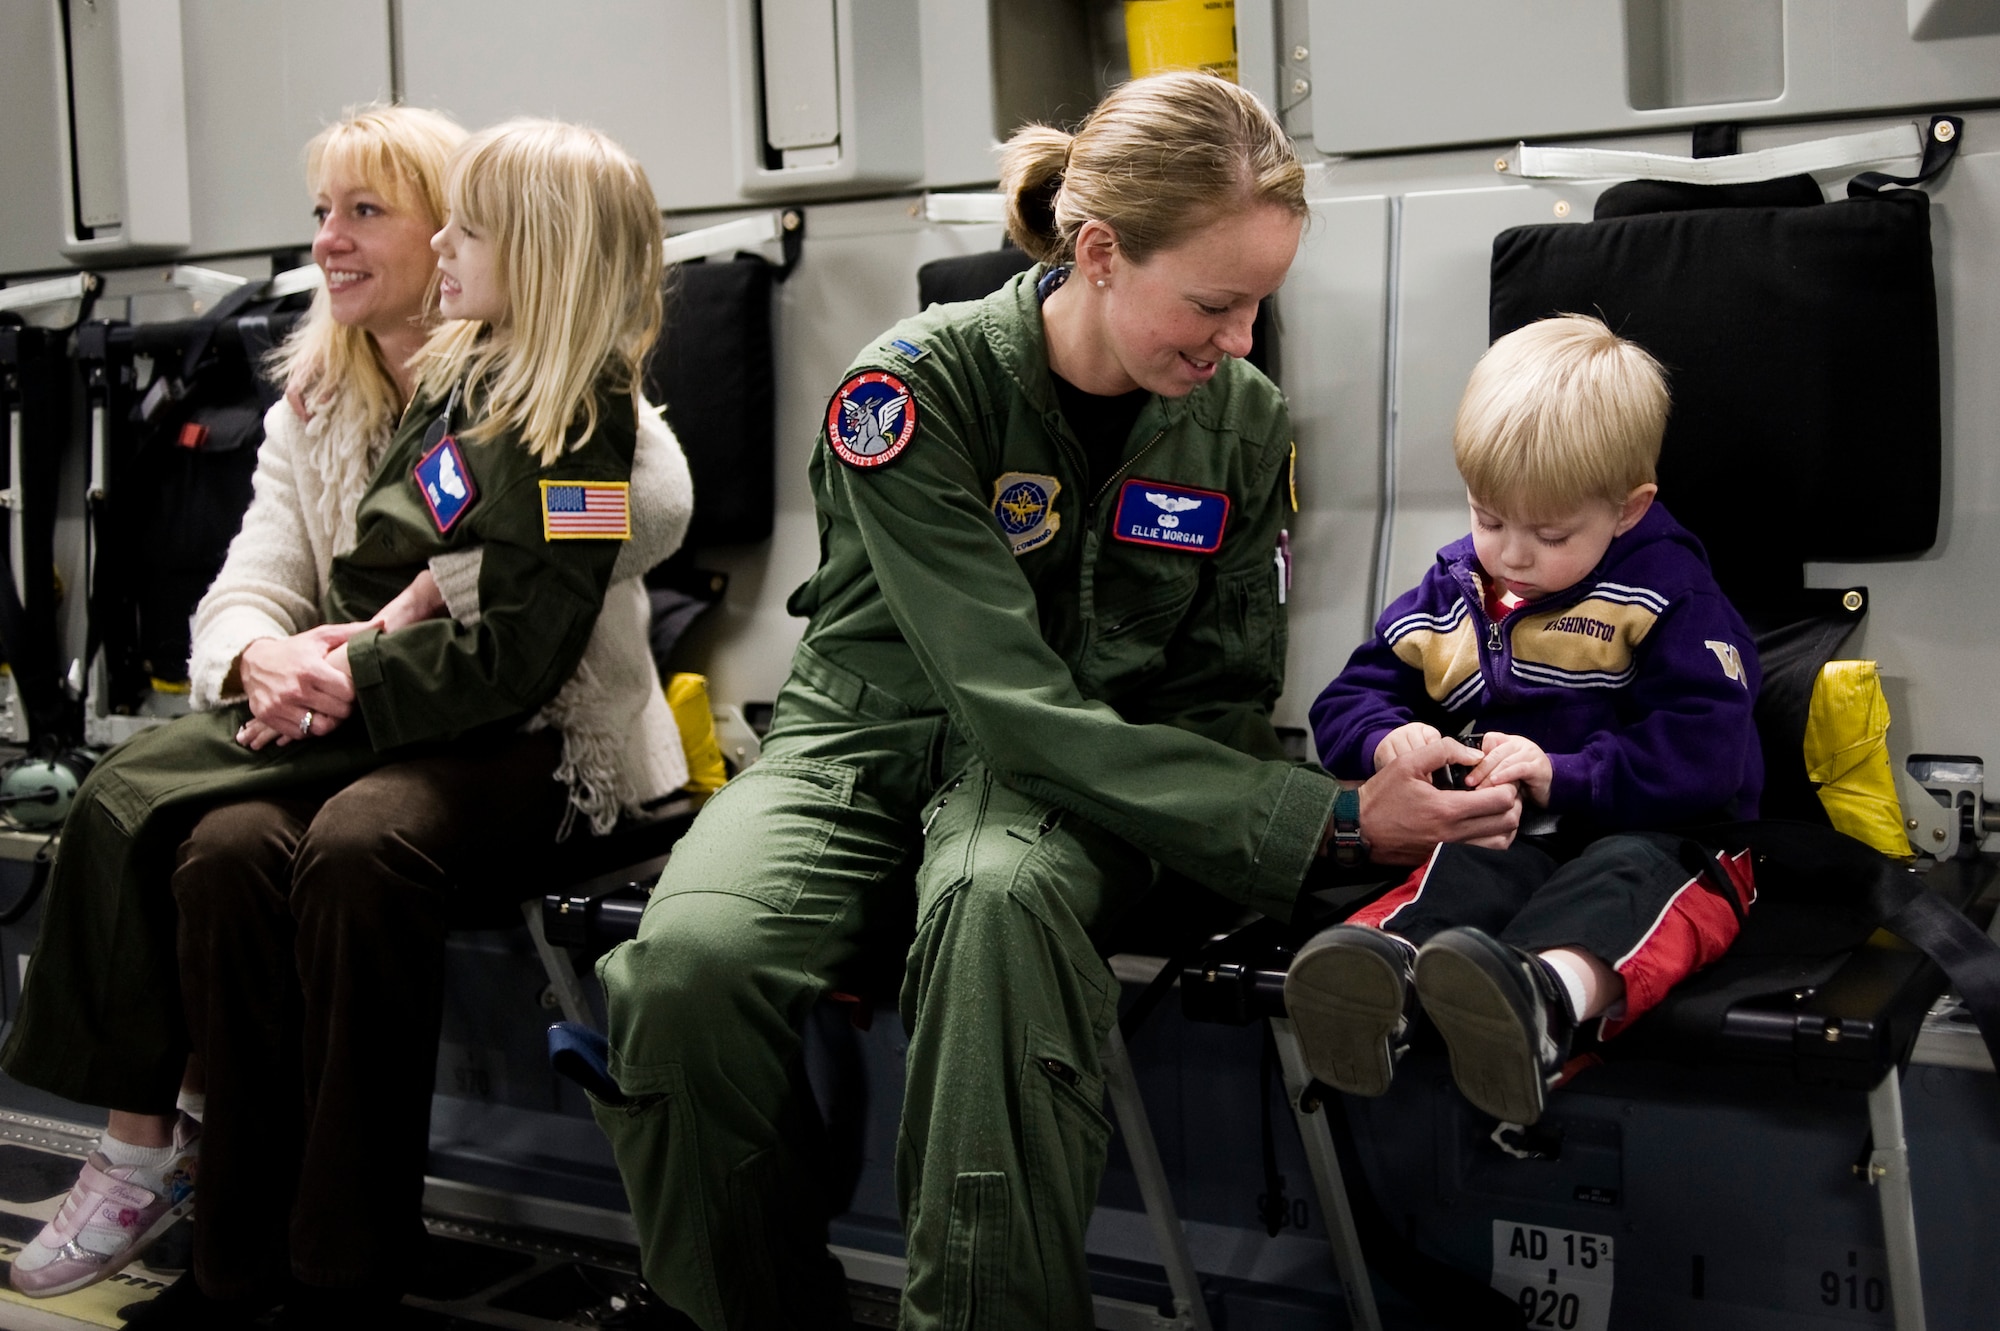 1st Lt. Ellie Morgan, 4th Airlift Squadron, center, assists Kaylie Bergen, 6, and brother Dylan, 3, with seatbelts in preparation for a photo-op onboard a C-17 Globemaster III May 11. (U.S. Air Force Photo by Abner Guzman)

